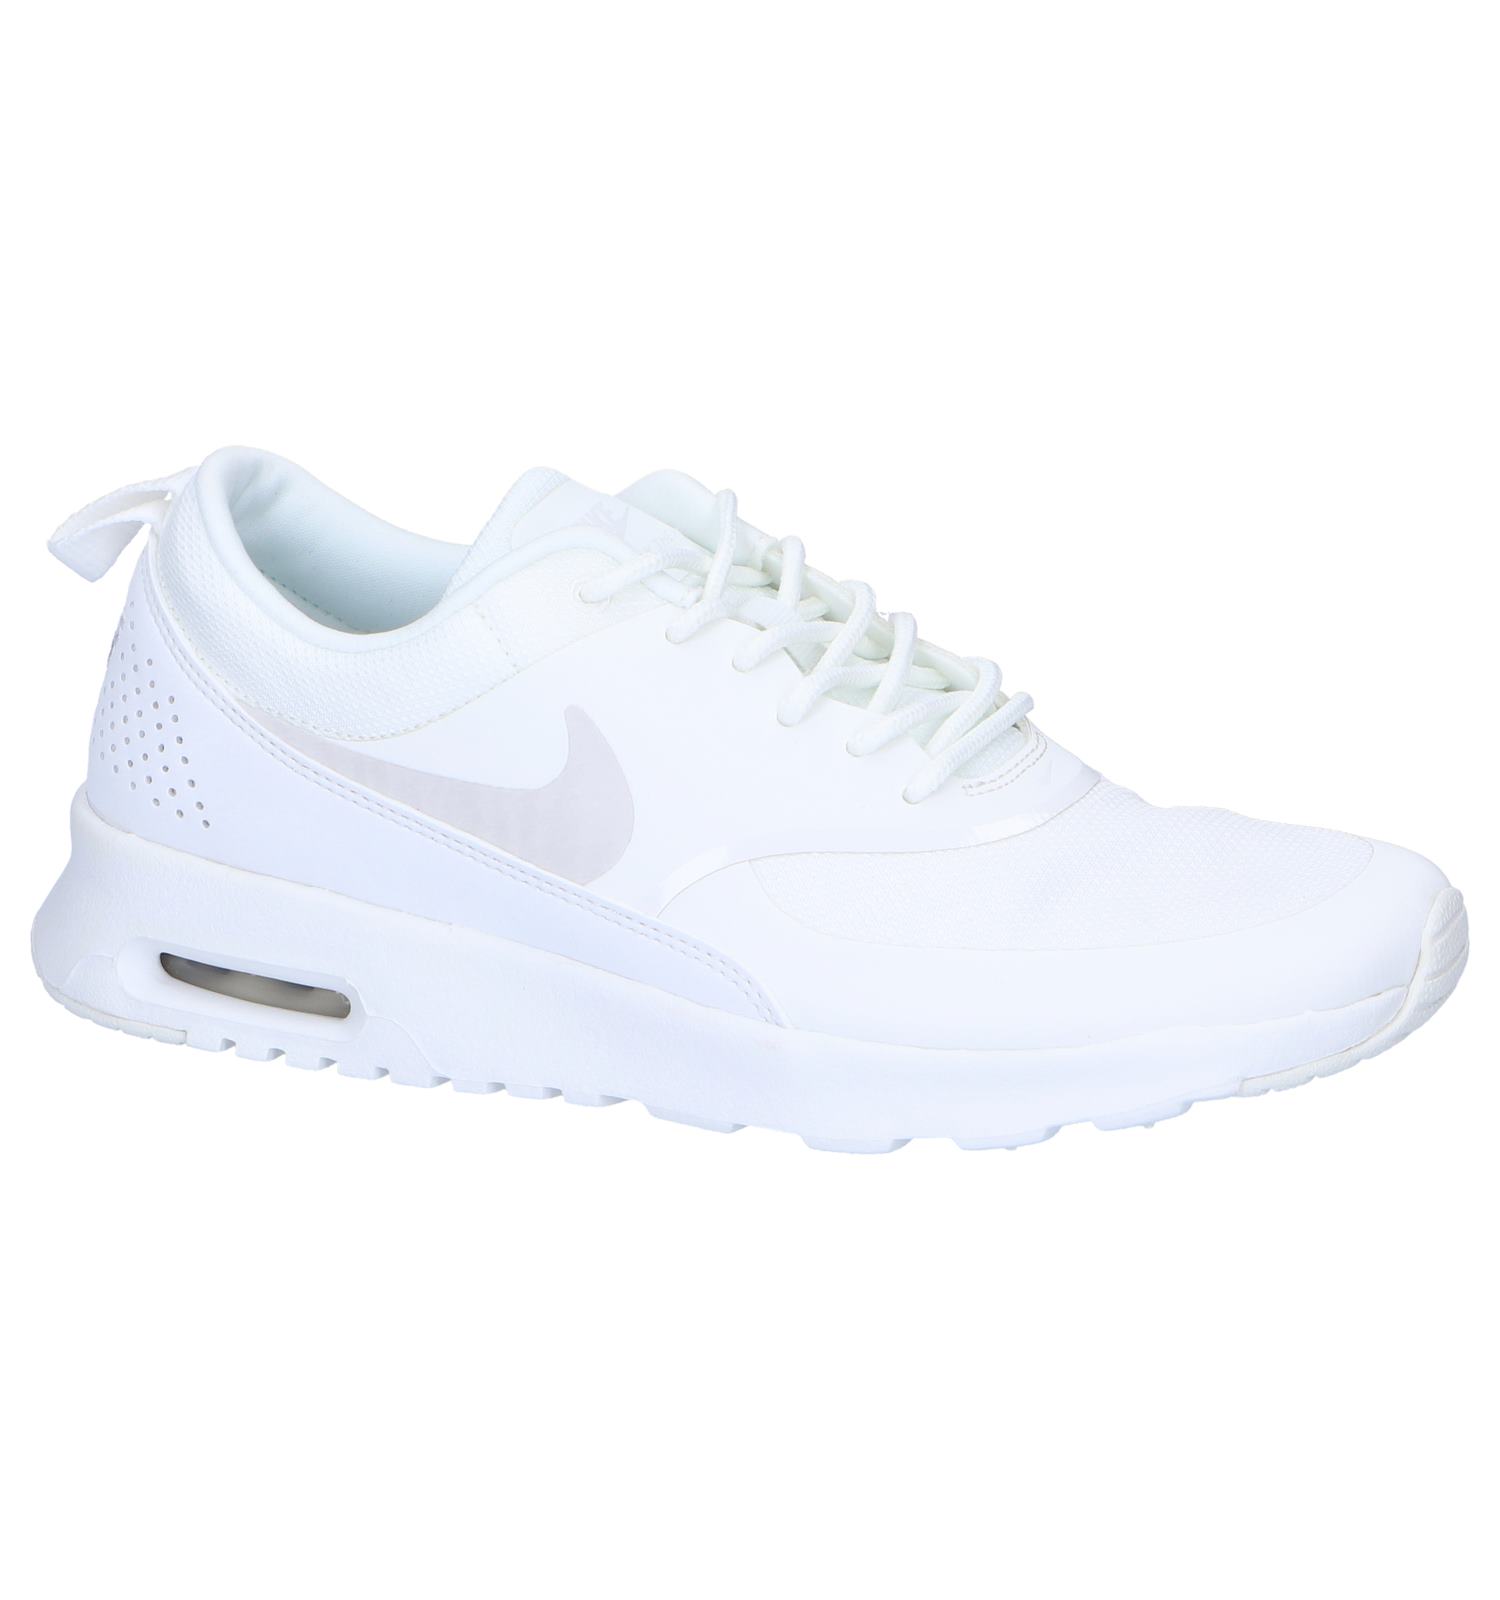 zo grond werk Witte Nike Sneaker Hotsell, SAVE 43% - aveclumiere.com